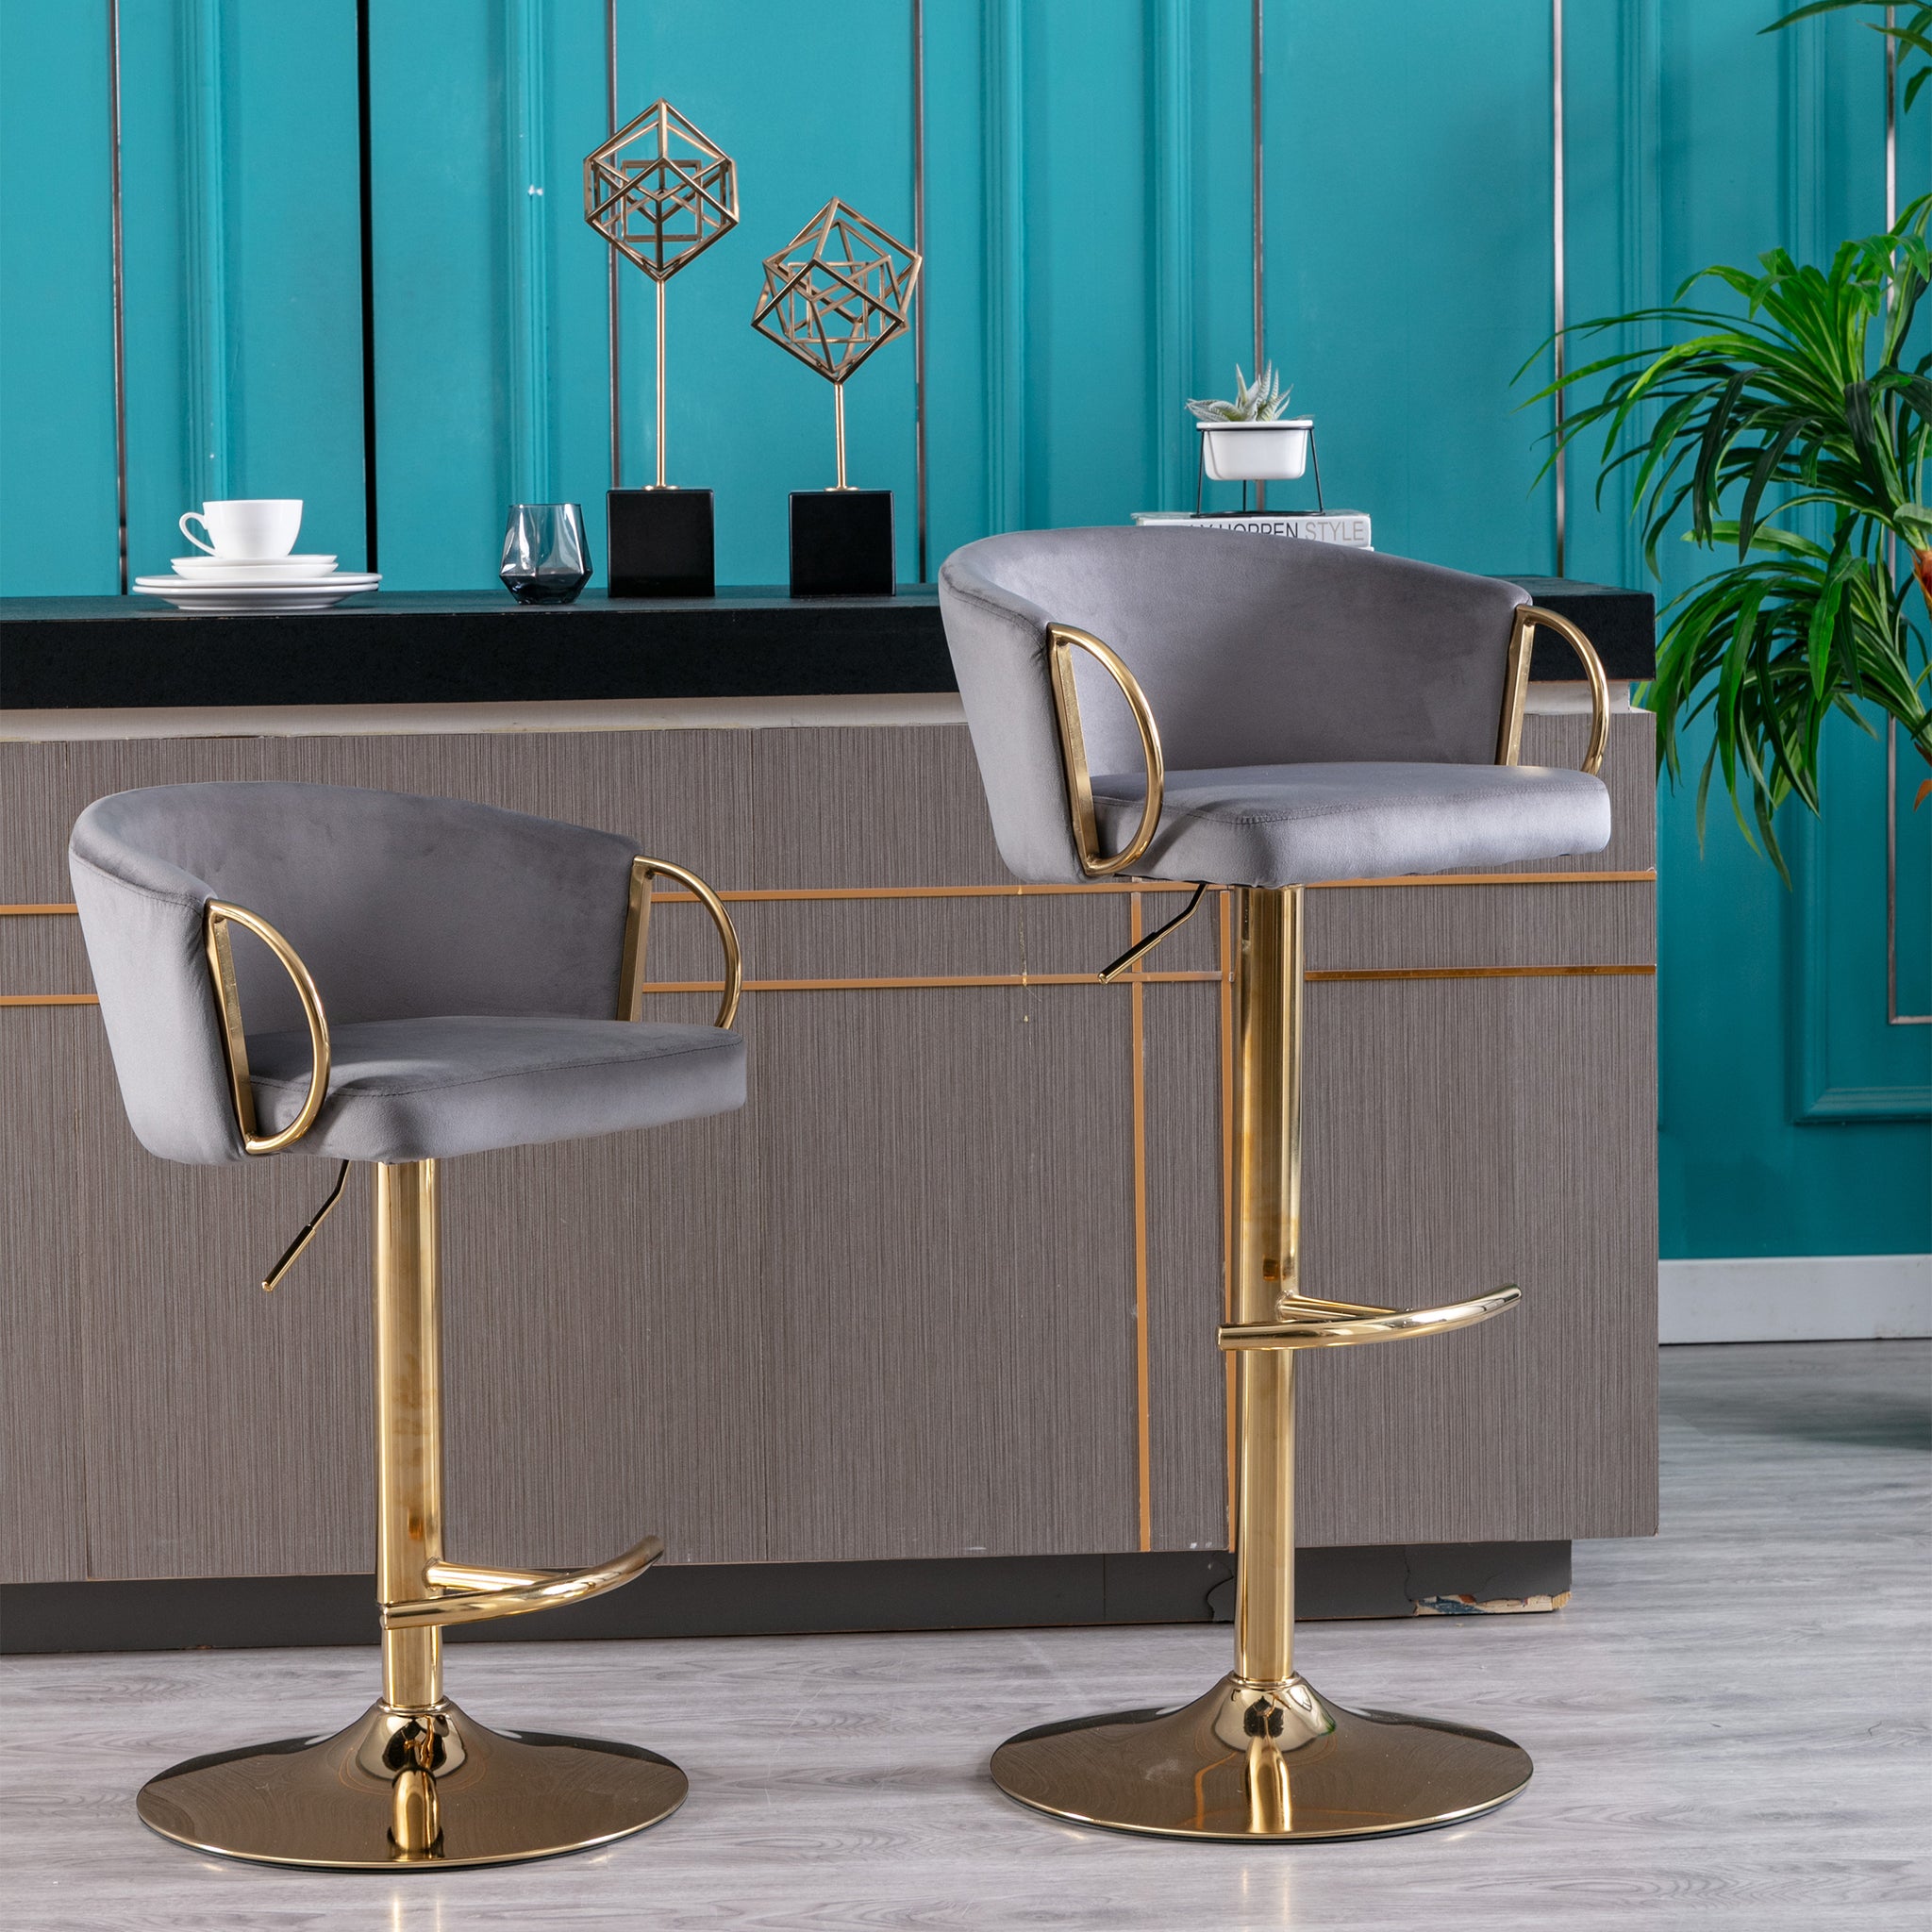 Set of 2 Bar Stools,with Chrome Footrest and Base